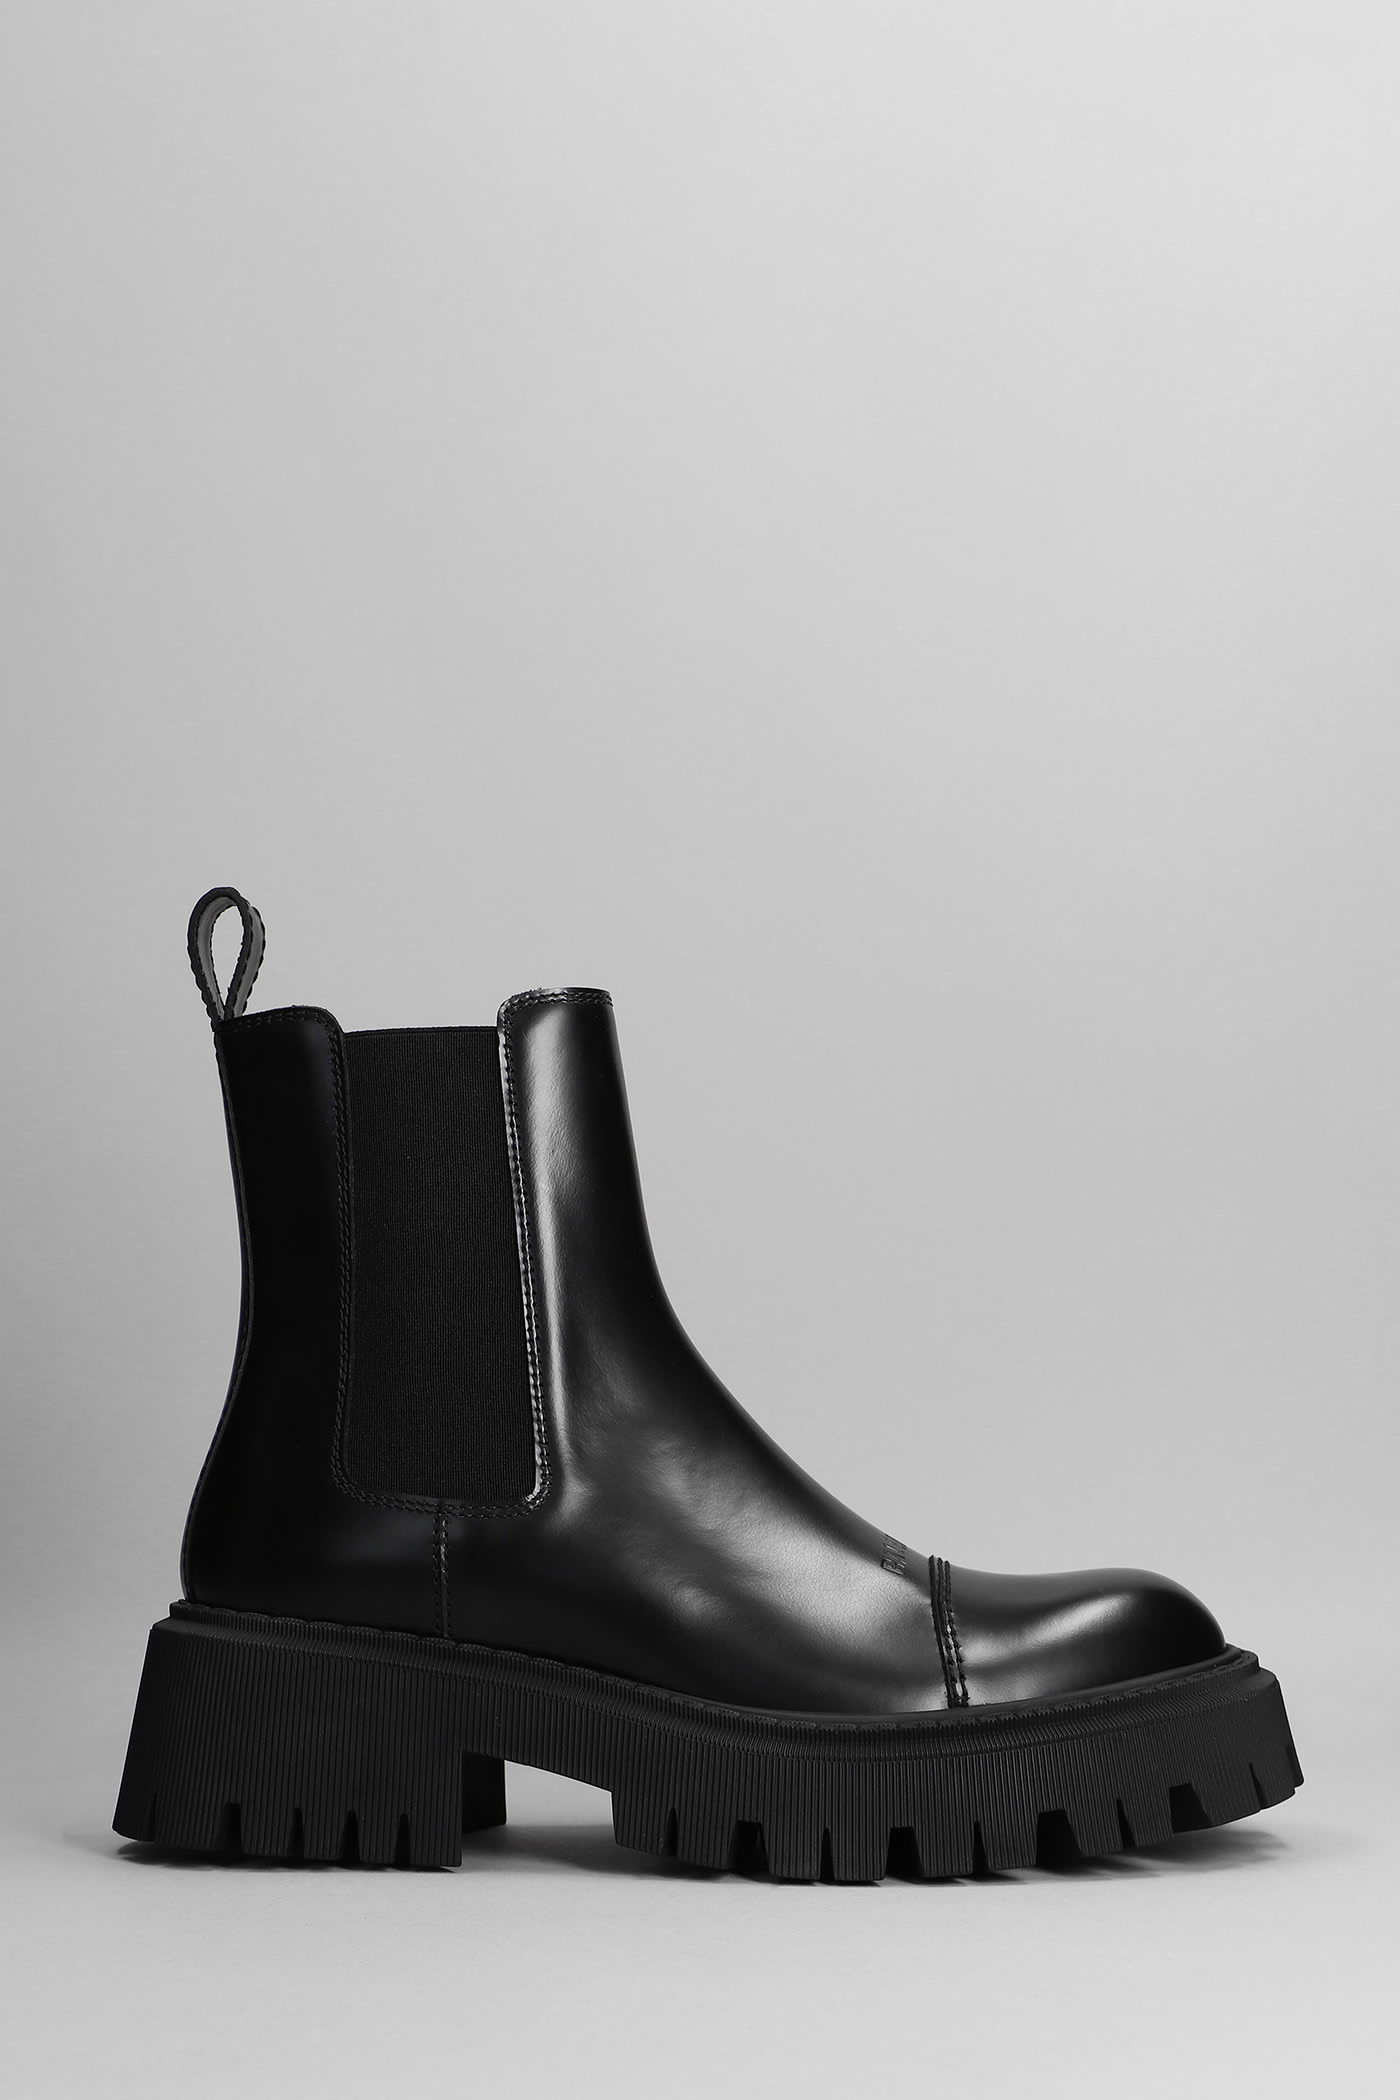 Balenciaga Tractor Bootie L20 Ankle Boots In Black Leather